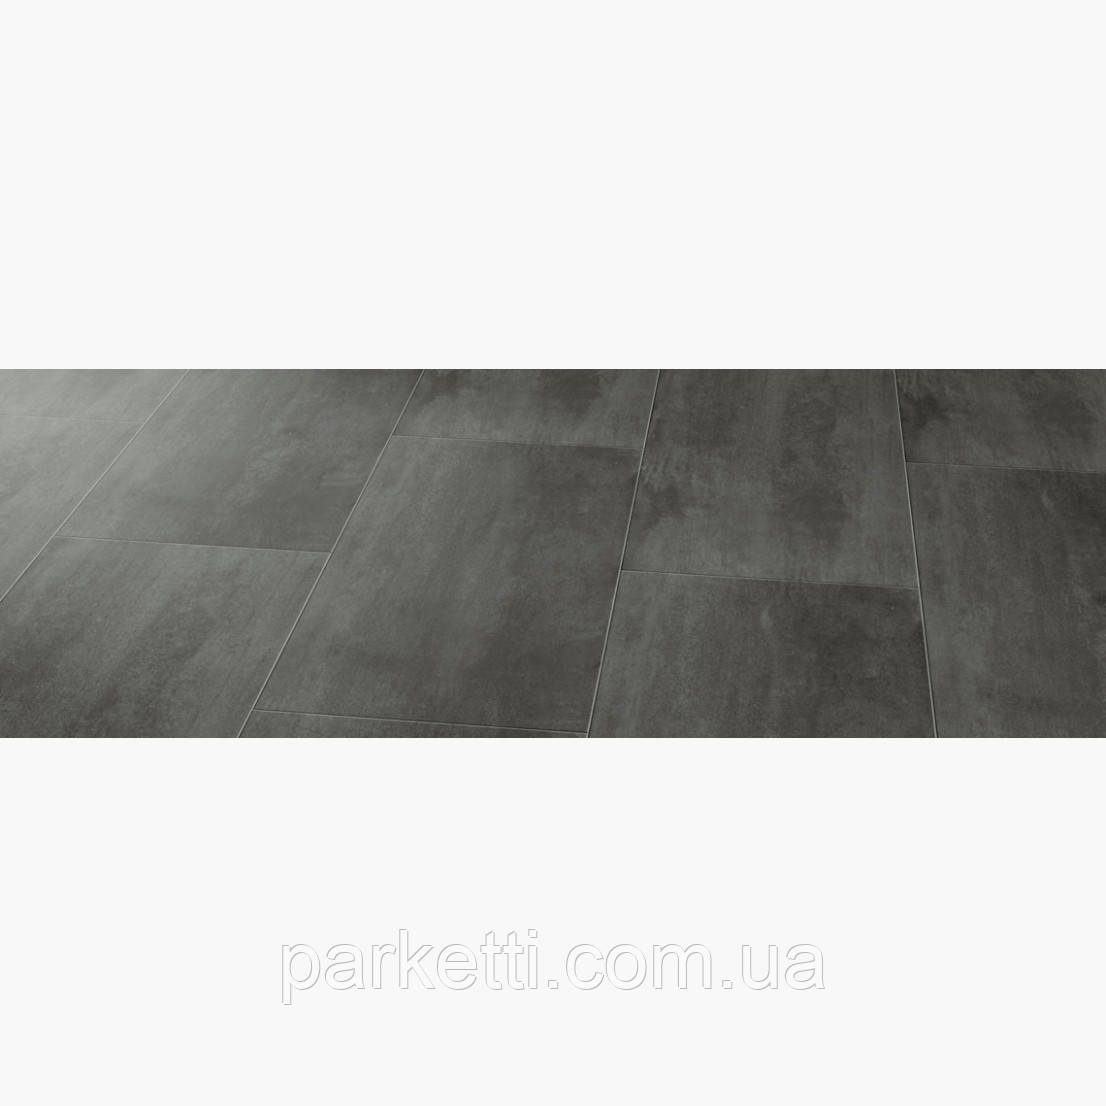 Expona Commercial Stone and Abstract PUR 5102 Iron Ore, виниловая плитка клеевая Polyflor - фото 2 - id-p774504503